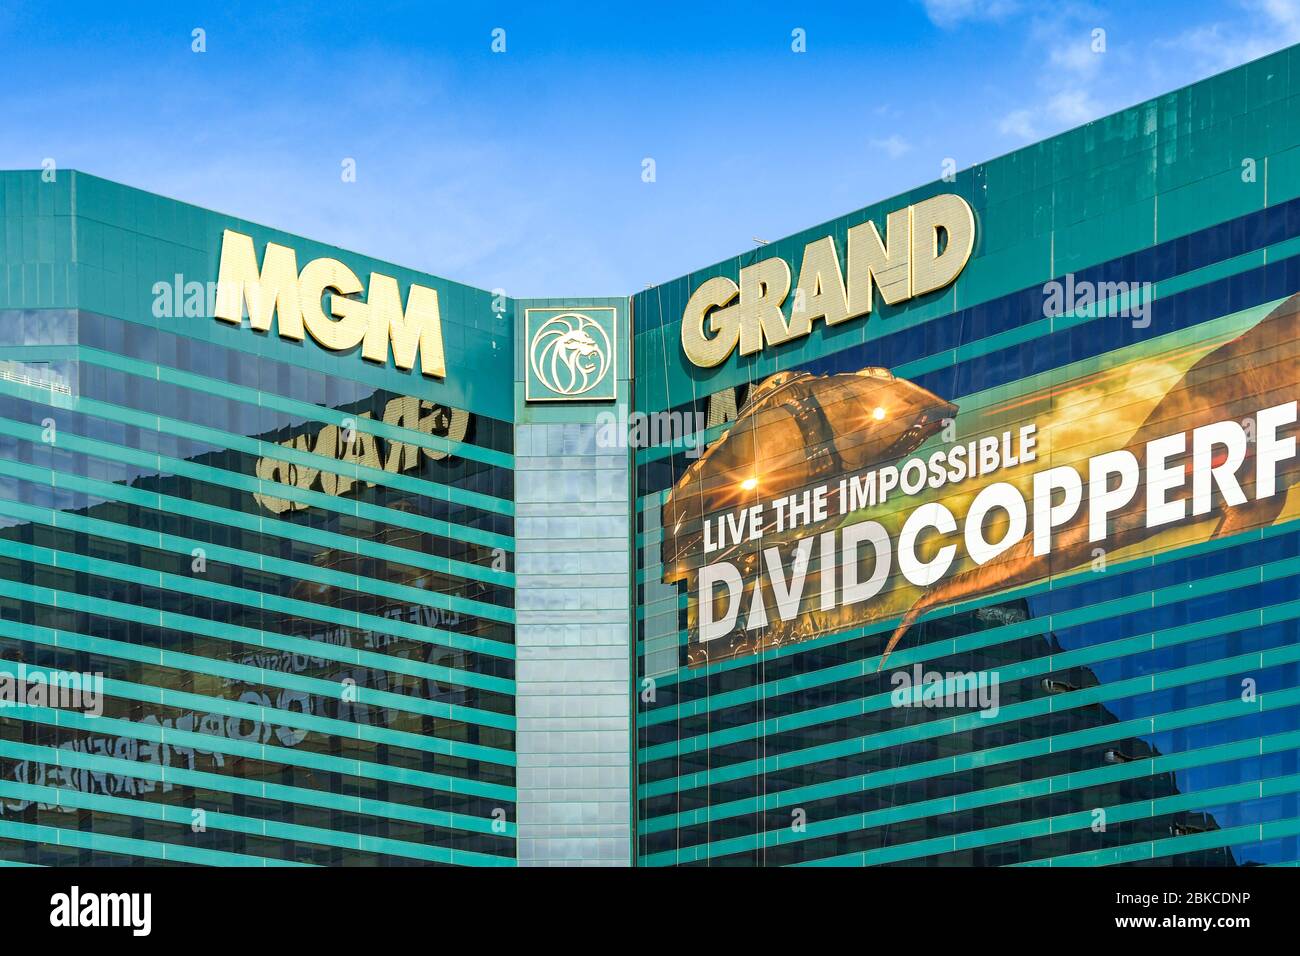 LAS VEGAS, NV, USA - FEBRUARY 2019: Exterior wide angle view of the MGM Resort and Hotel in Las Vegas Boulevard. Stock Photo